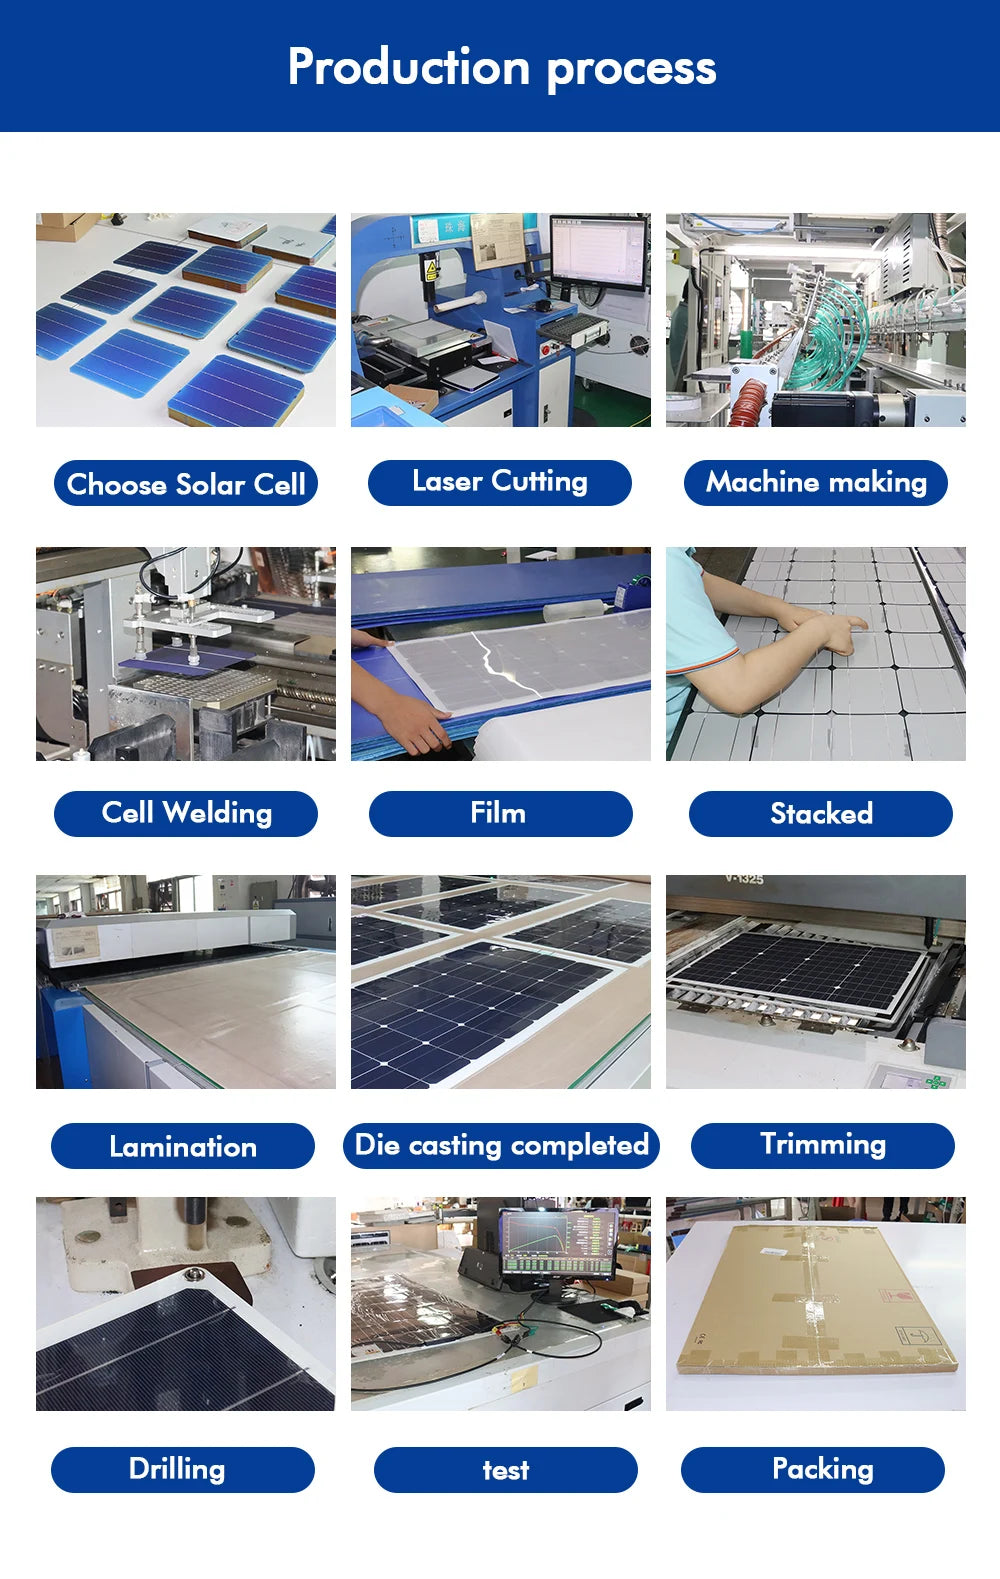 12v solar panel, Manufacturing process includes laser cutting, welding, stacking, laminating, casting, trimming, drilling, testing, and packing.